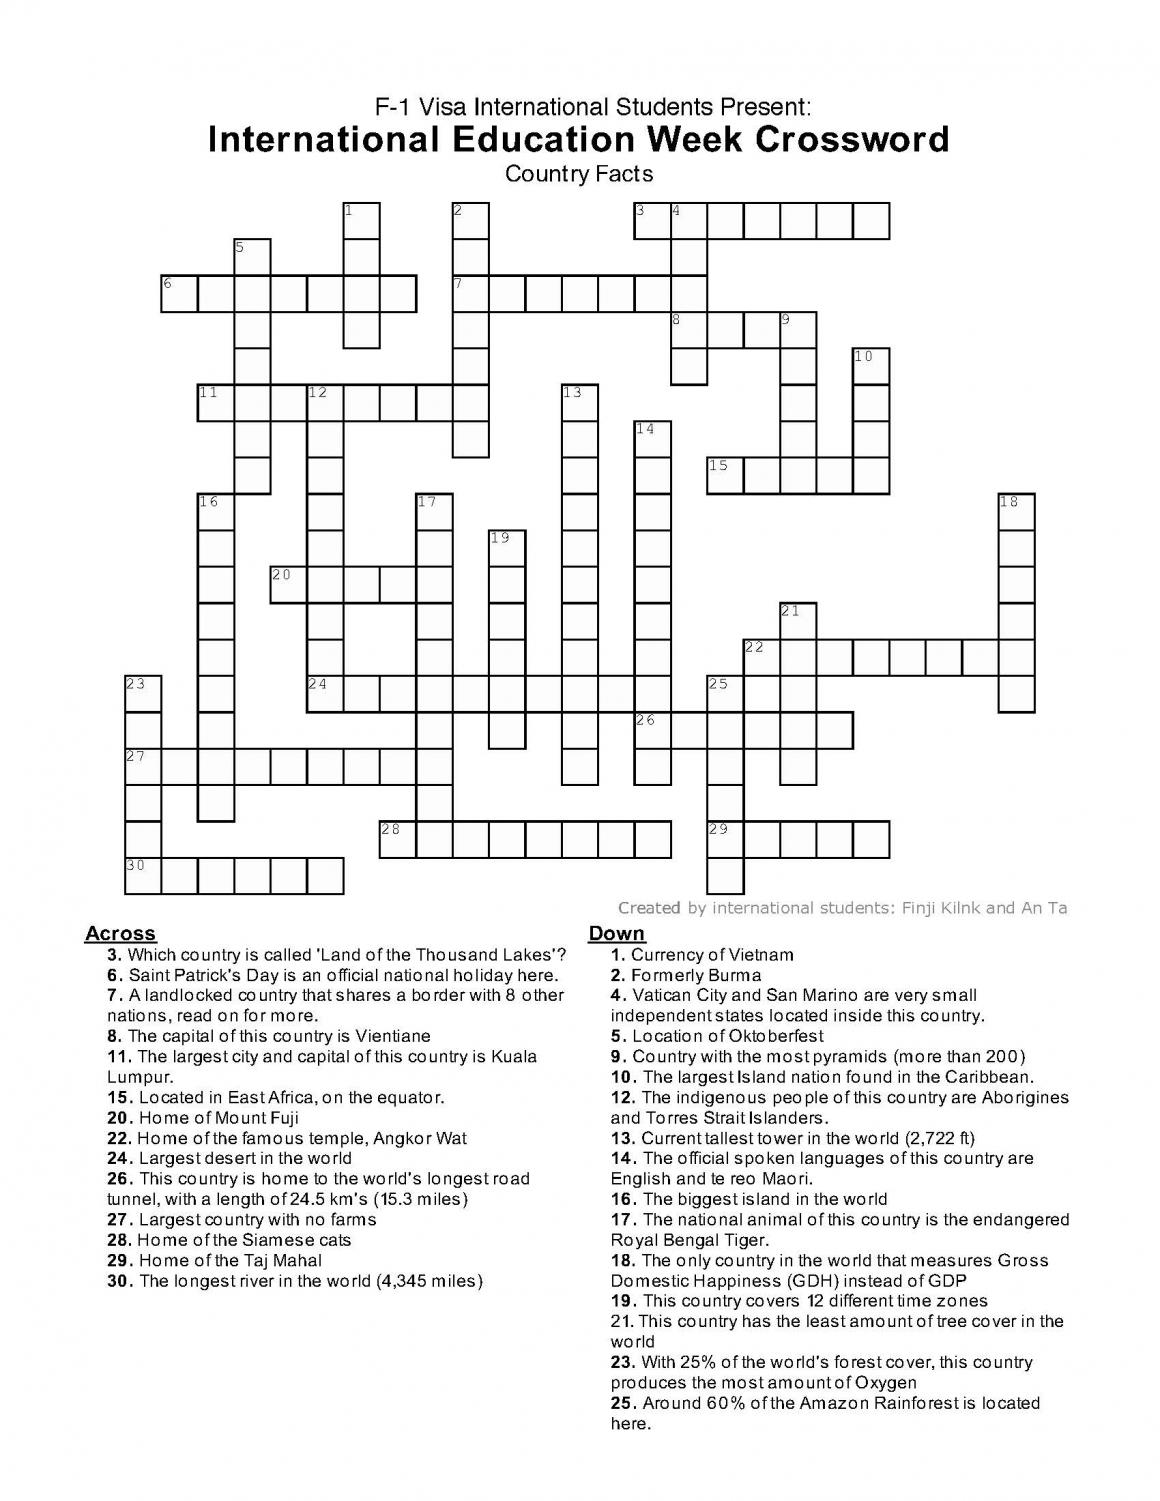 Need a break? Try this crossword puzzle put together by El Camino's